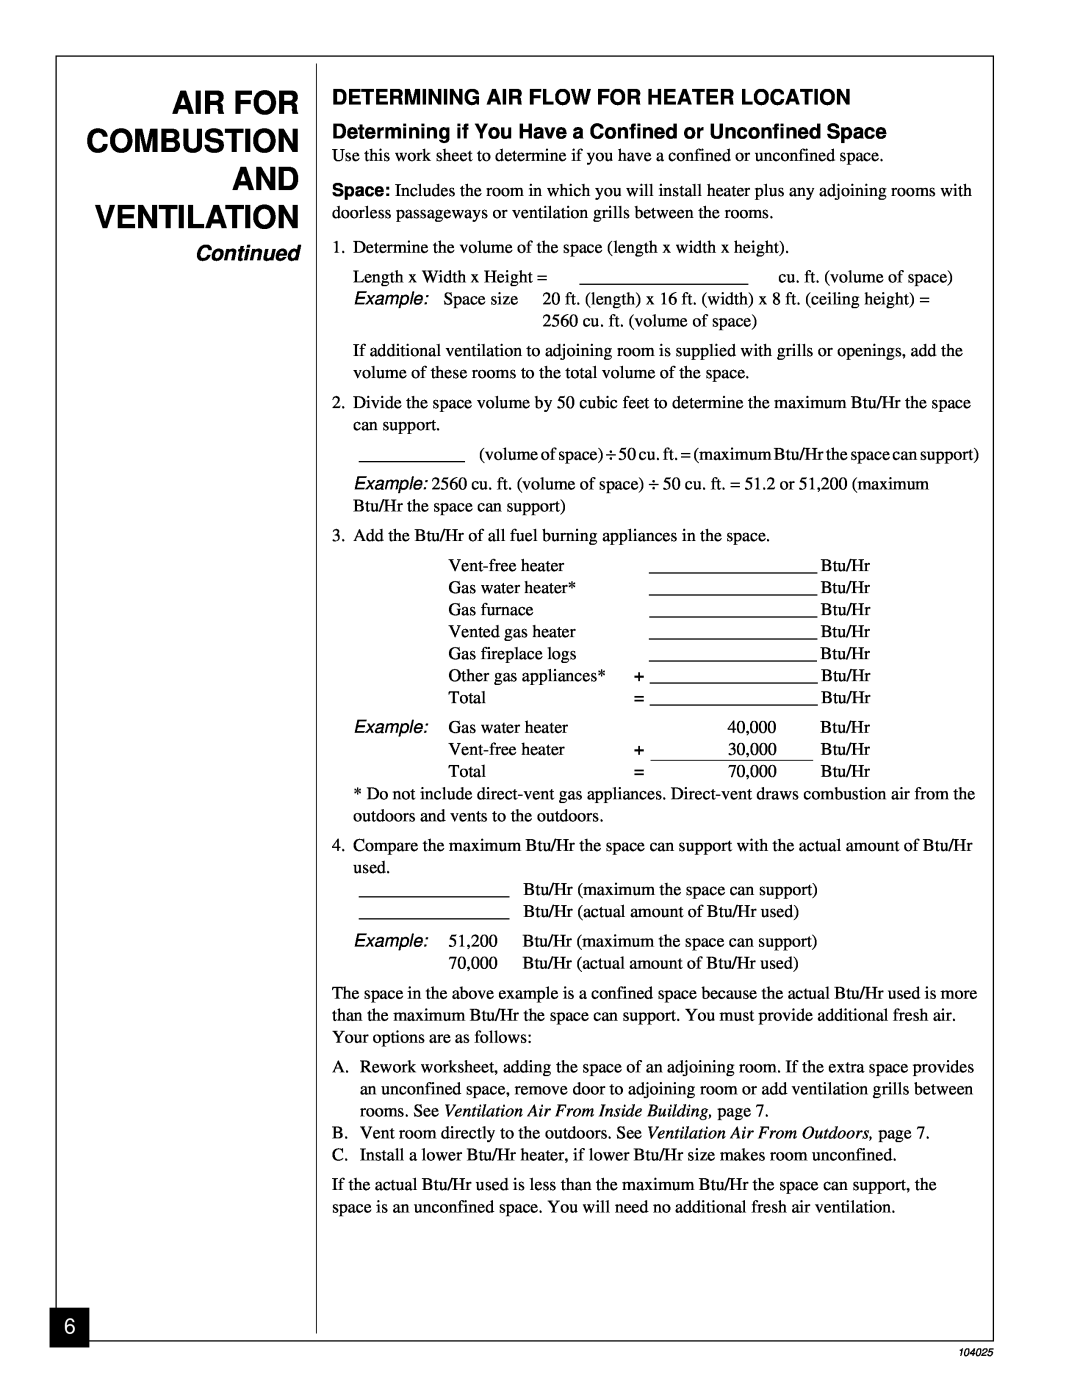 Desa SCIVFG Air For Combustion And Ventilation, Continued, Determining Air Flow For Heater Location, Example 51,200 